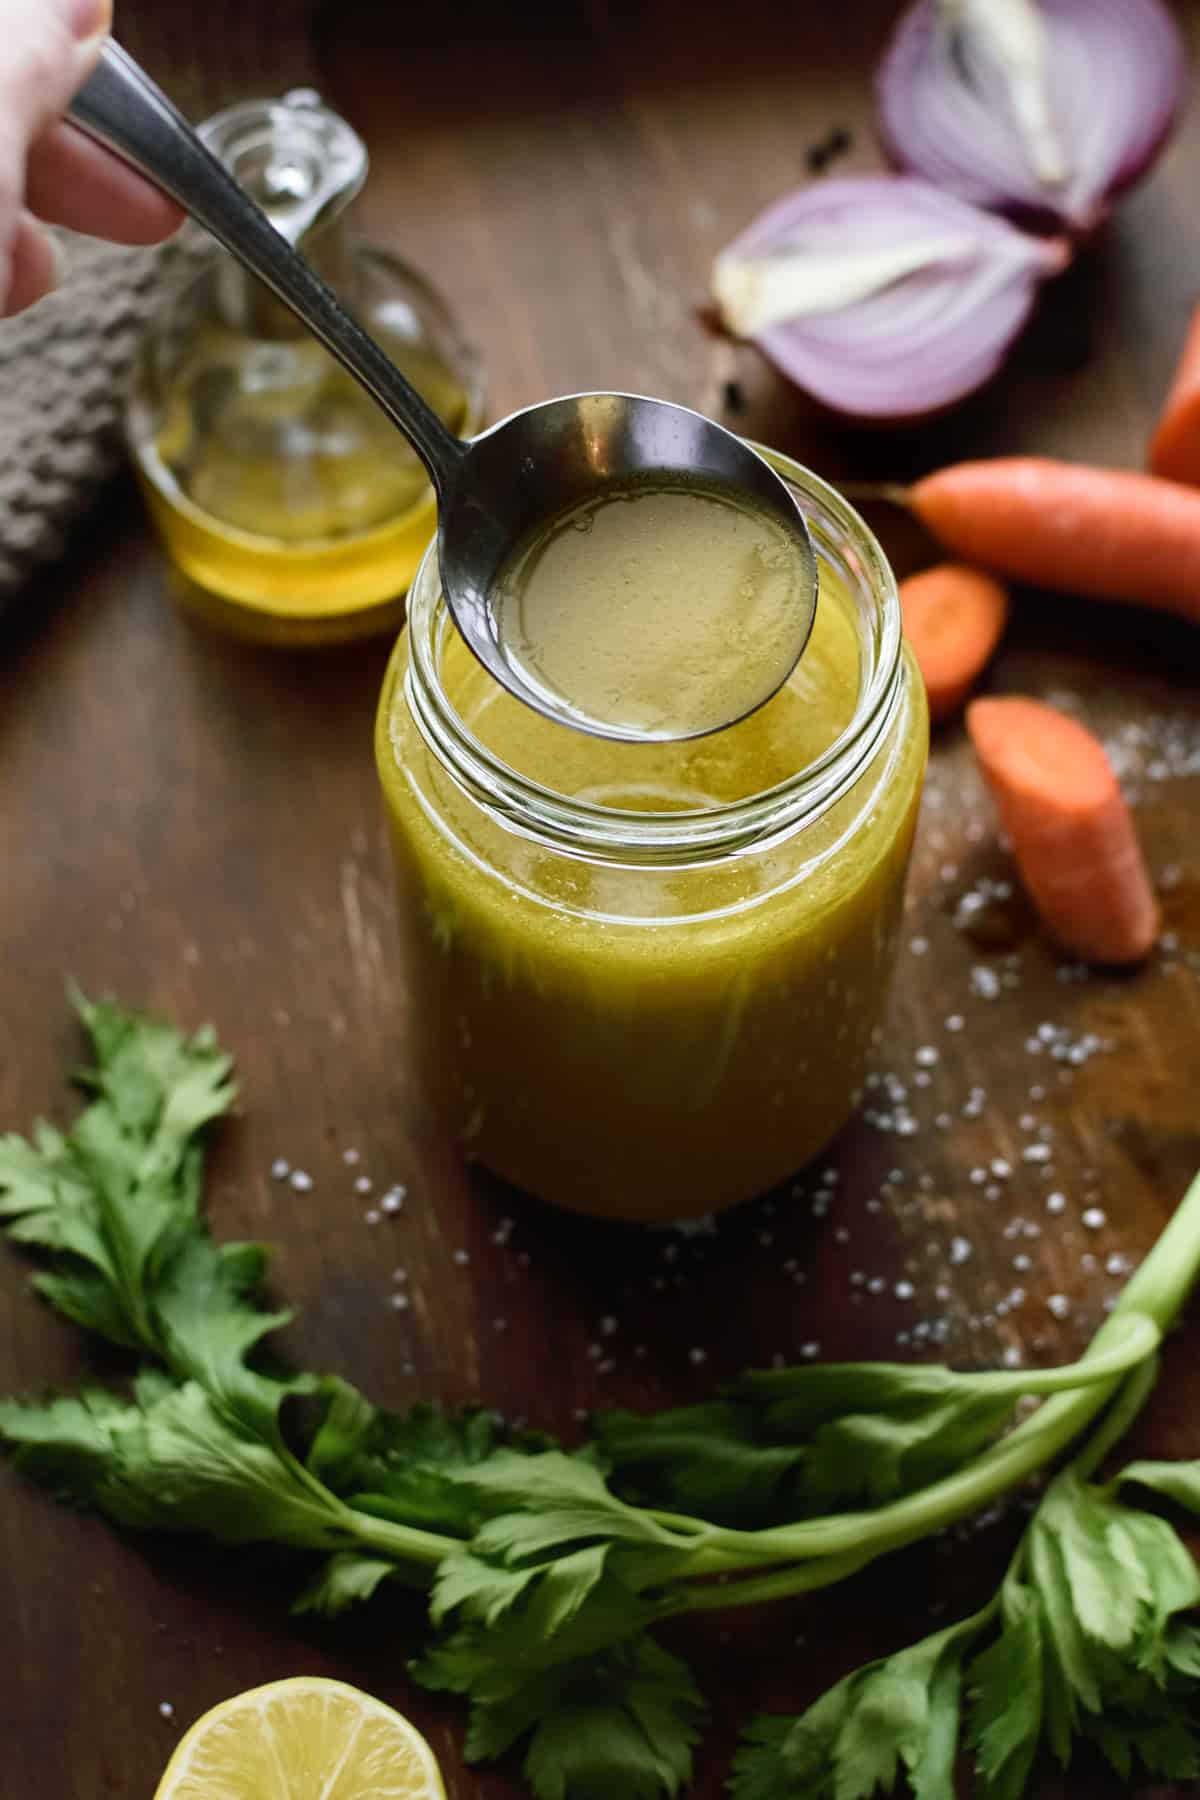 How To Make Chicken Stock Easily At Home